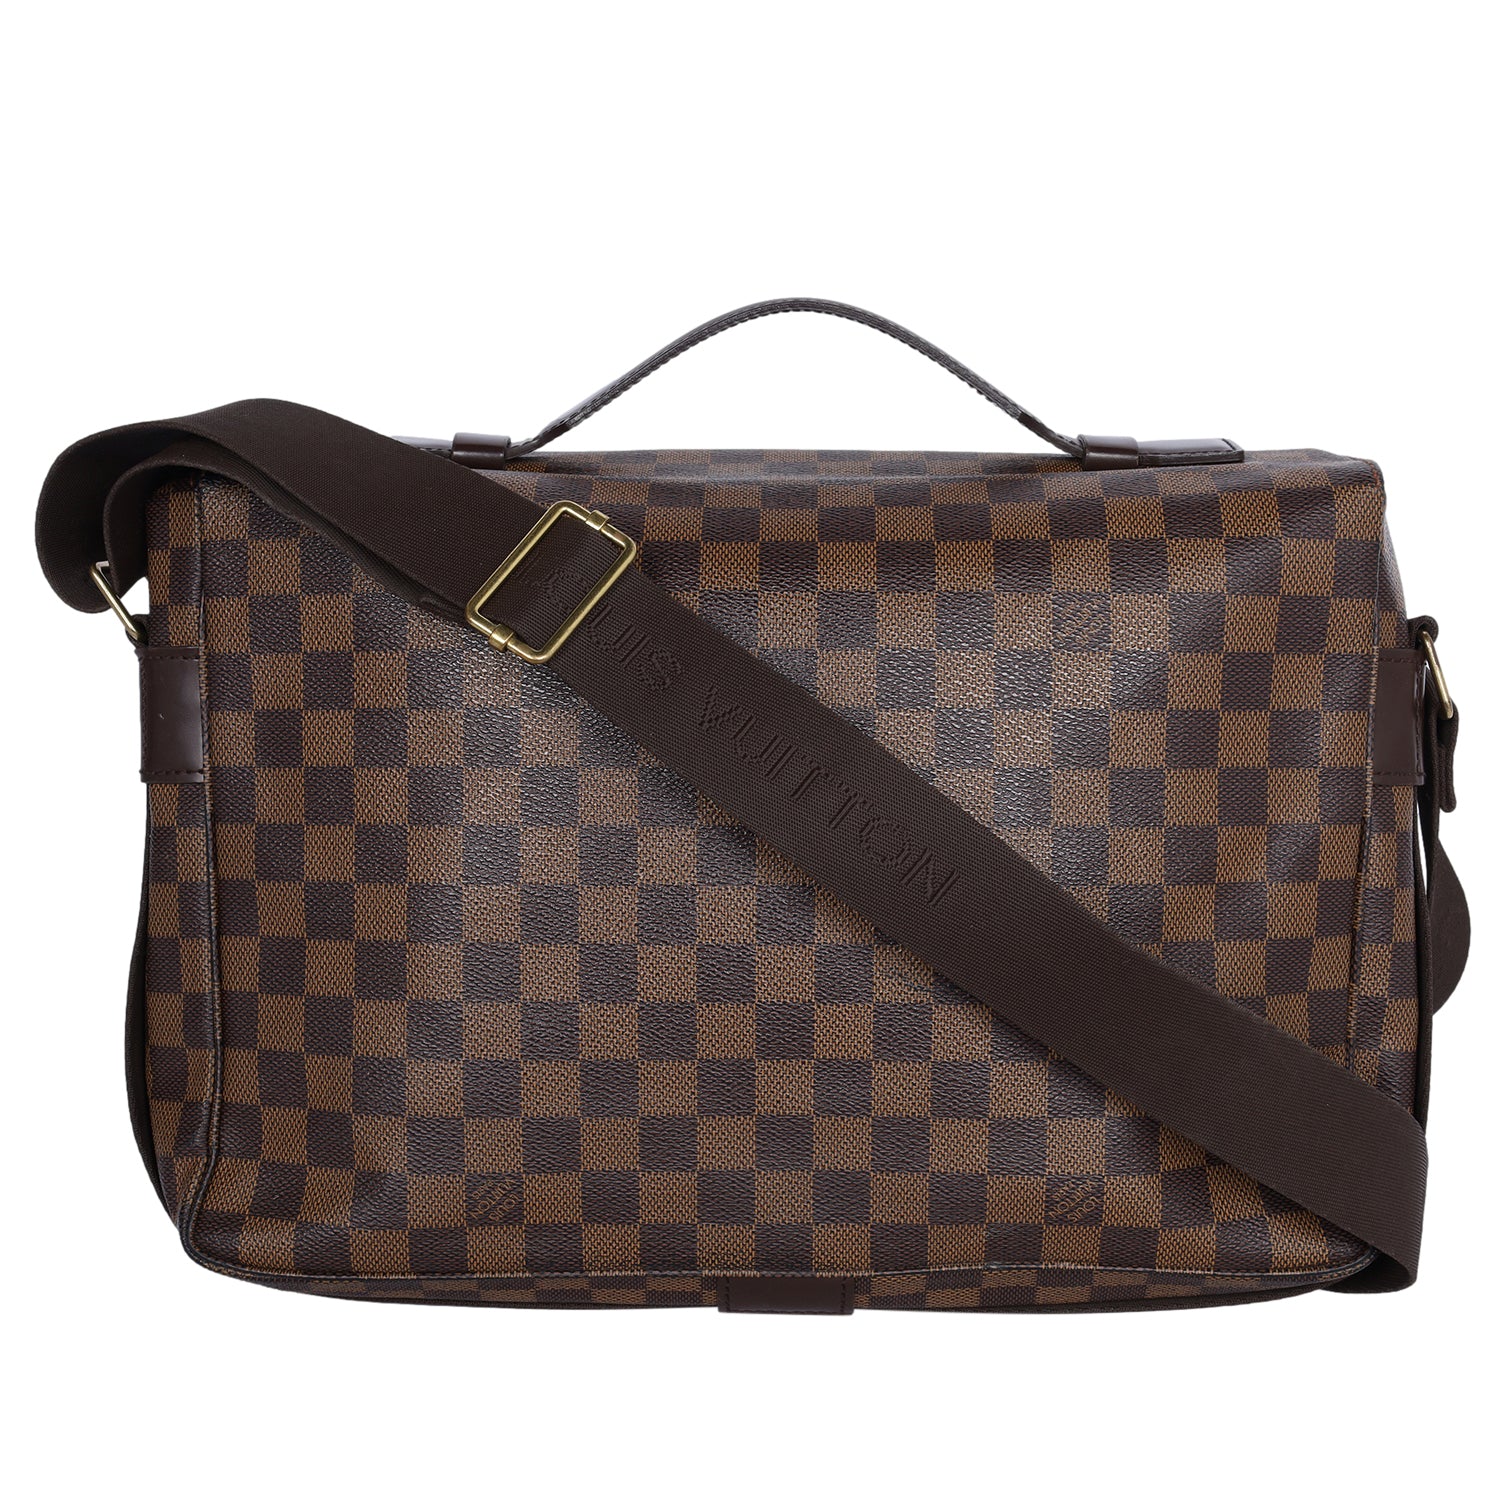 Pre-owned Louis Vuitton 2013 Beaubourg Messenger Bag In Brown